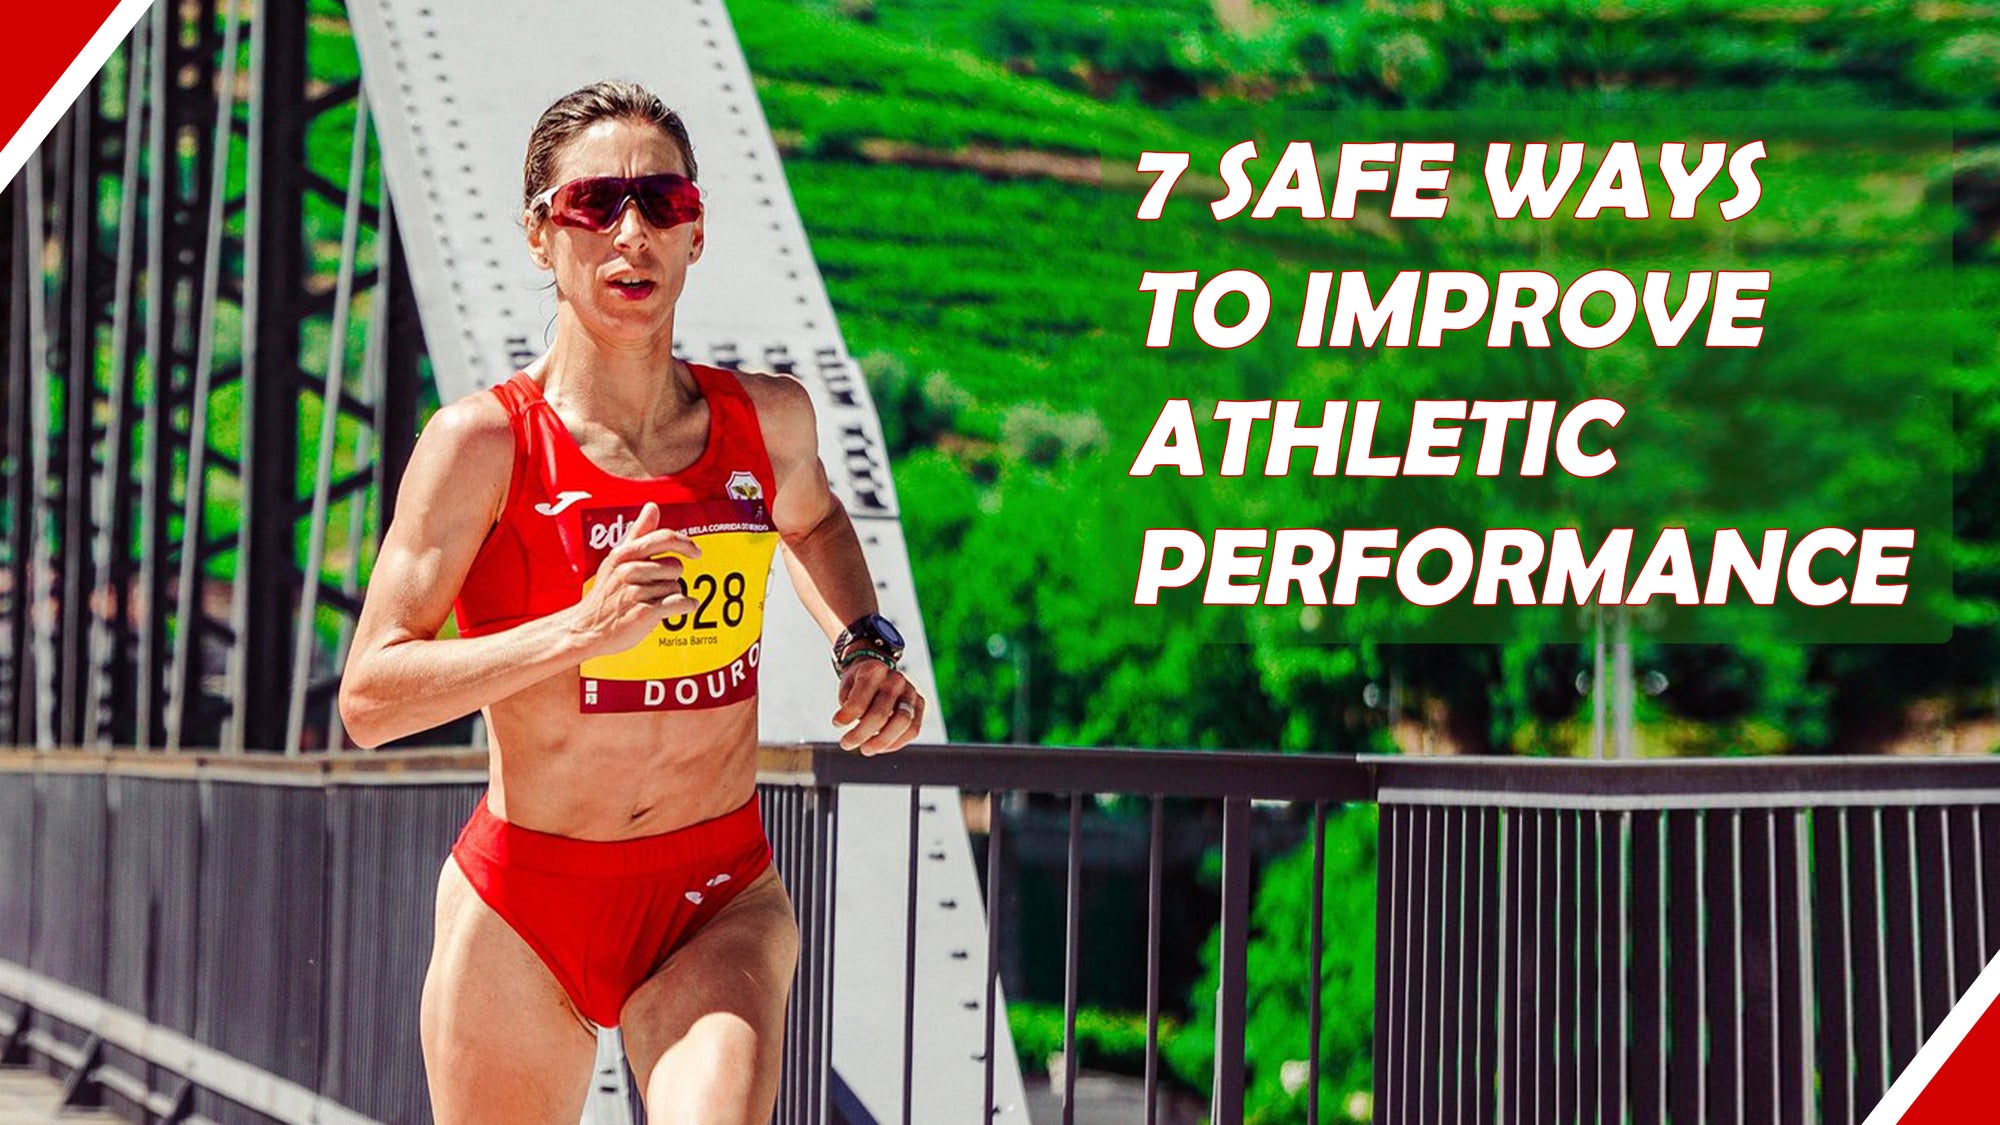 Athletic Performance and Ways to Improve It